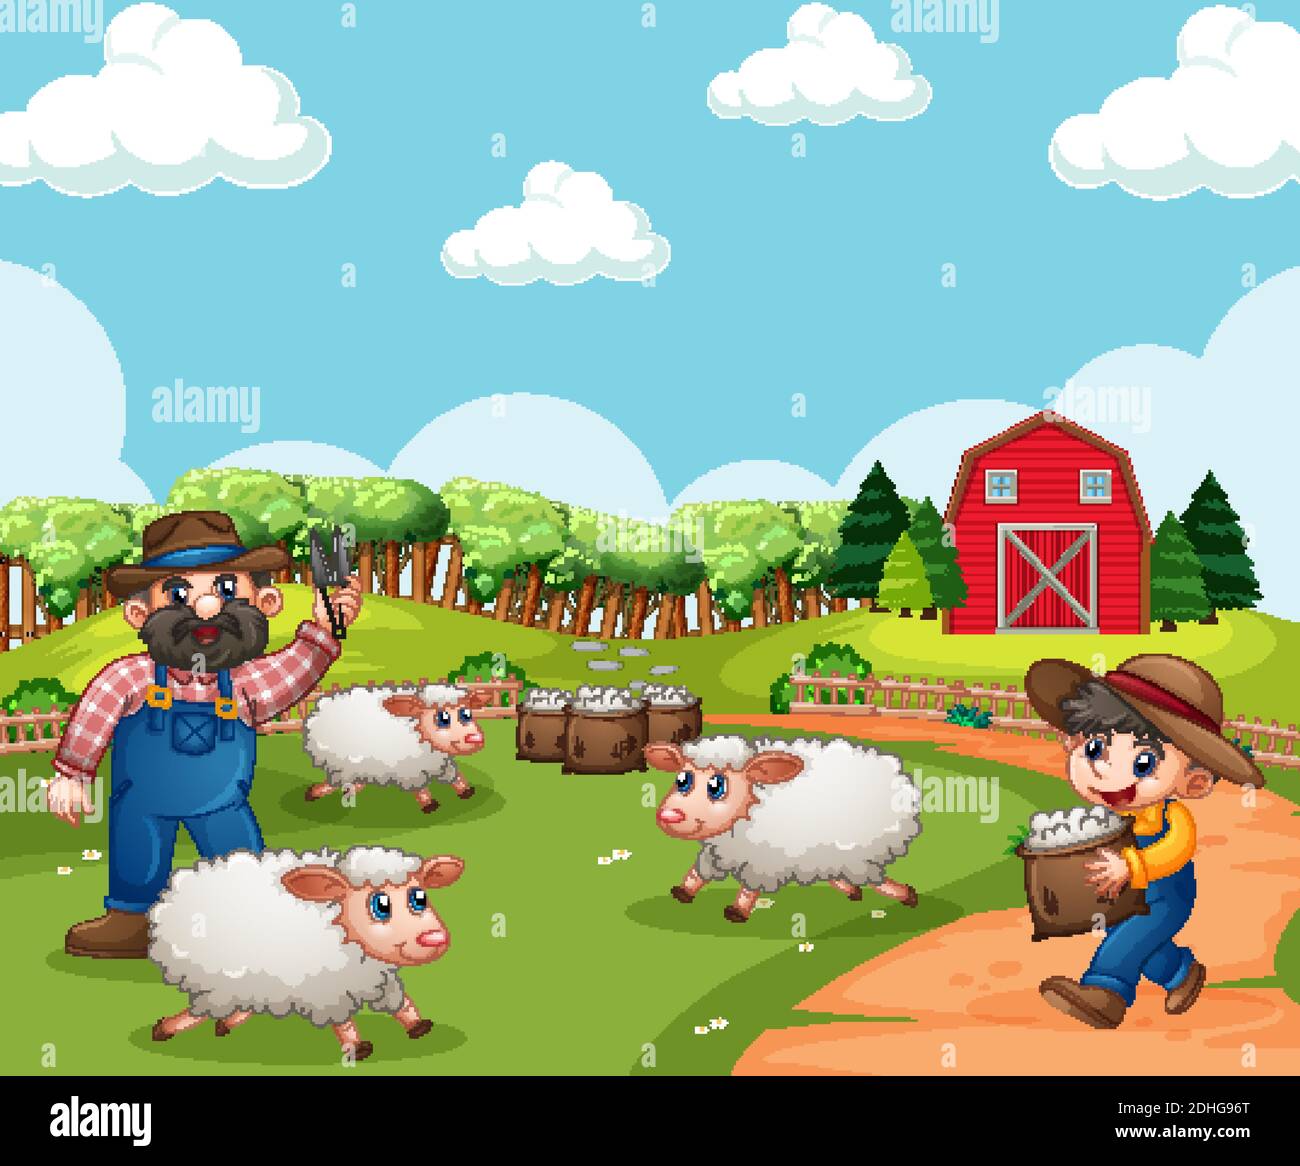 Farm with red barn and windmill scene illustration Stock Vector